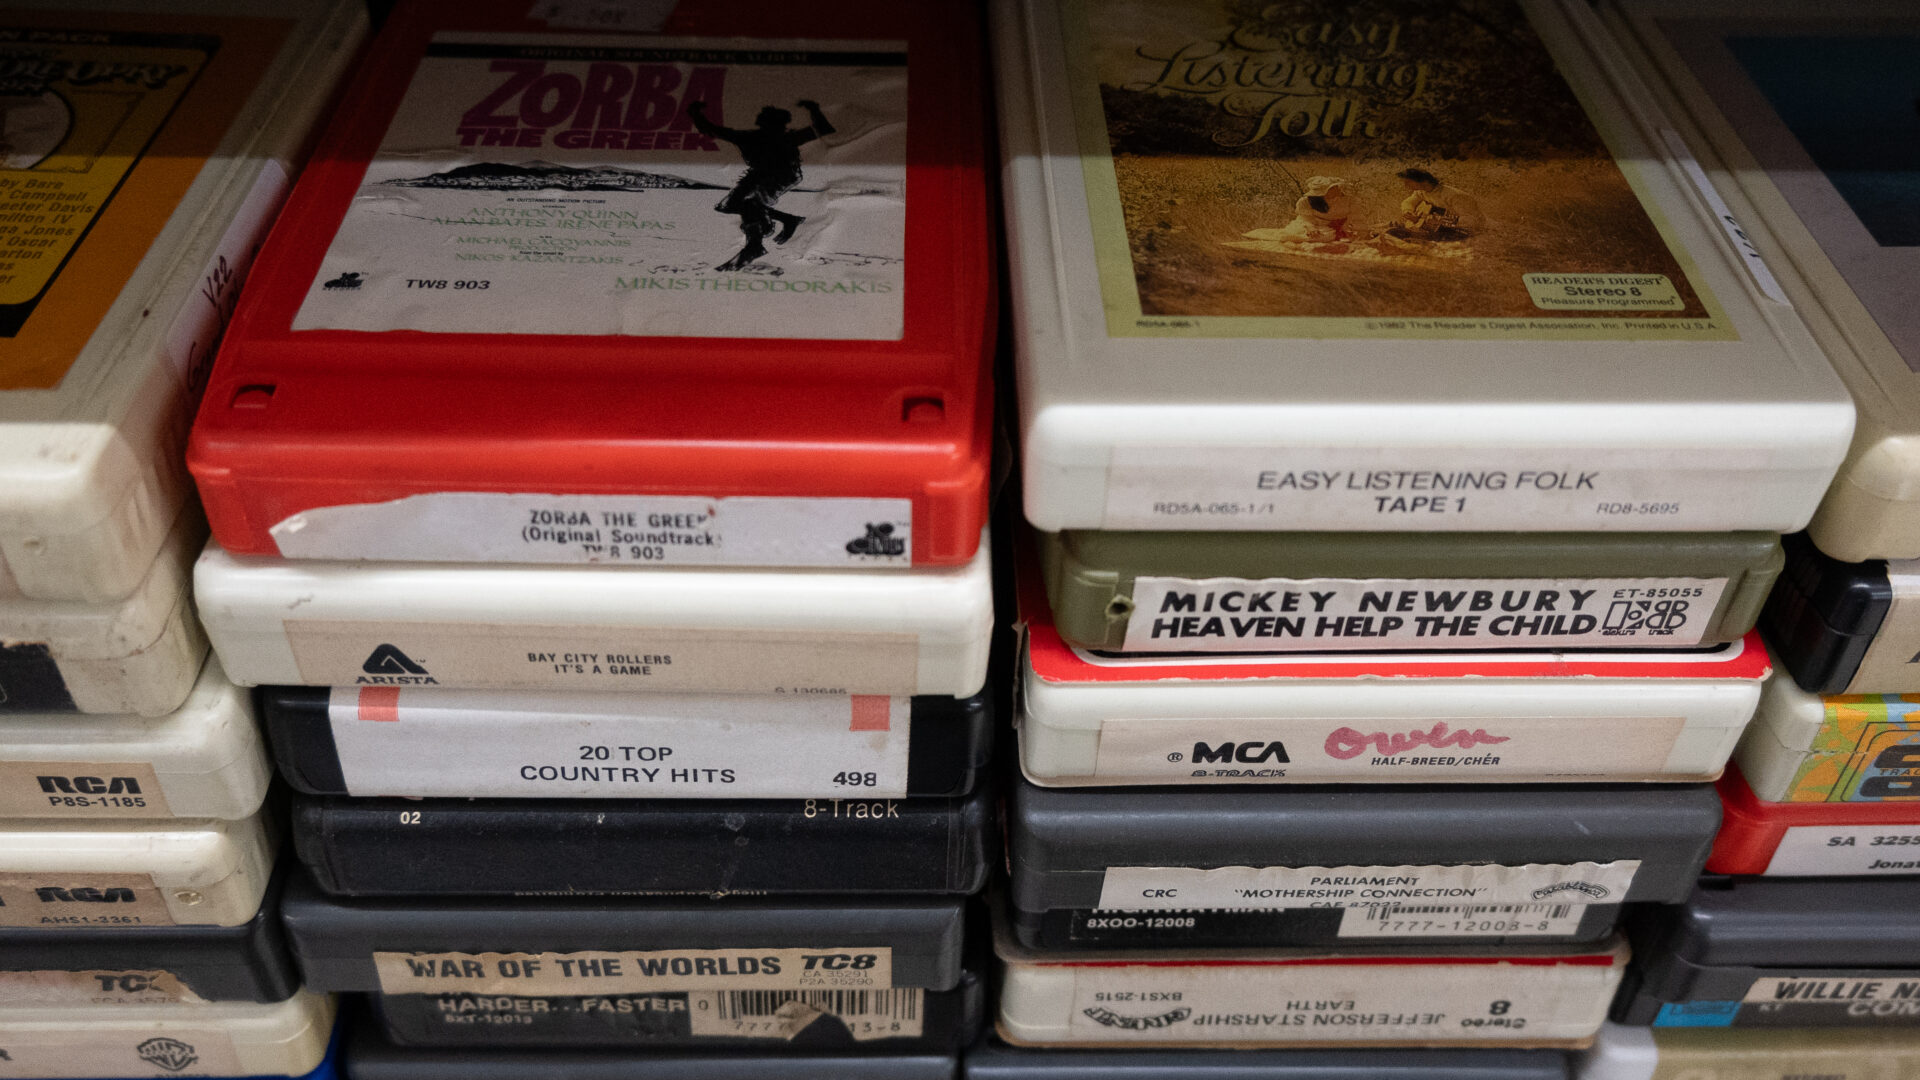 A stack of various tapes on top of each other.